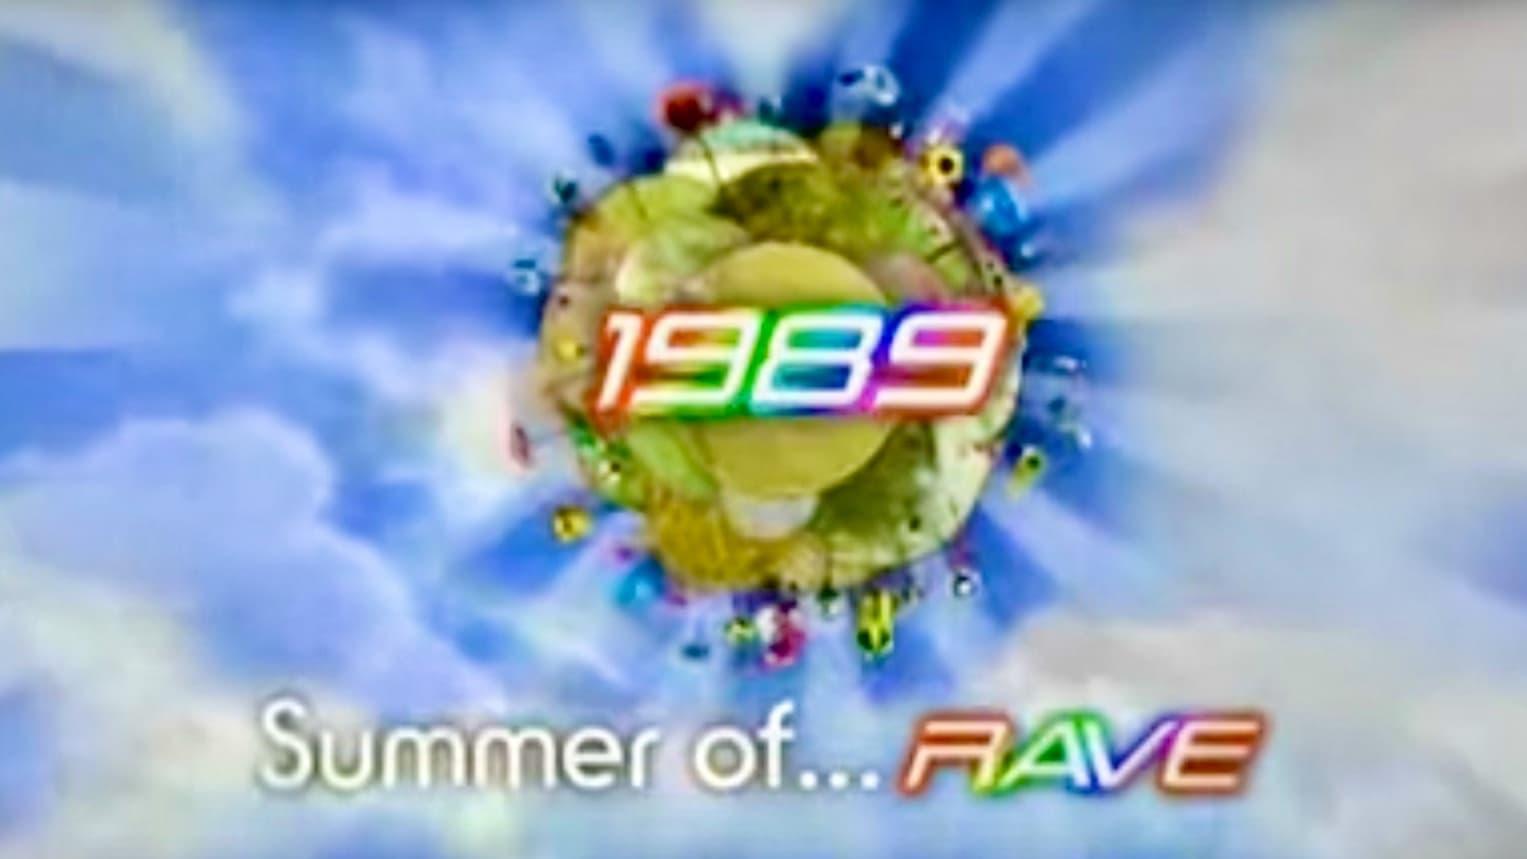 The Summer of Rave, 1989 backdrop